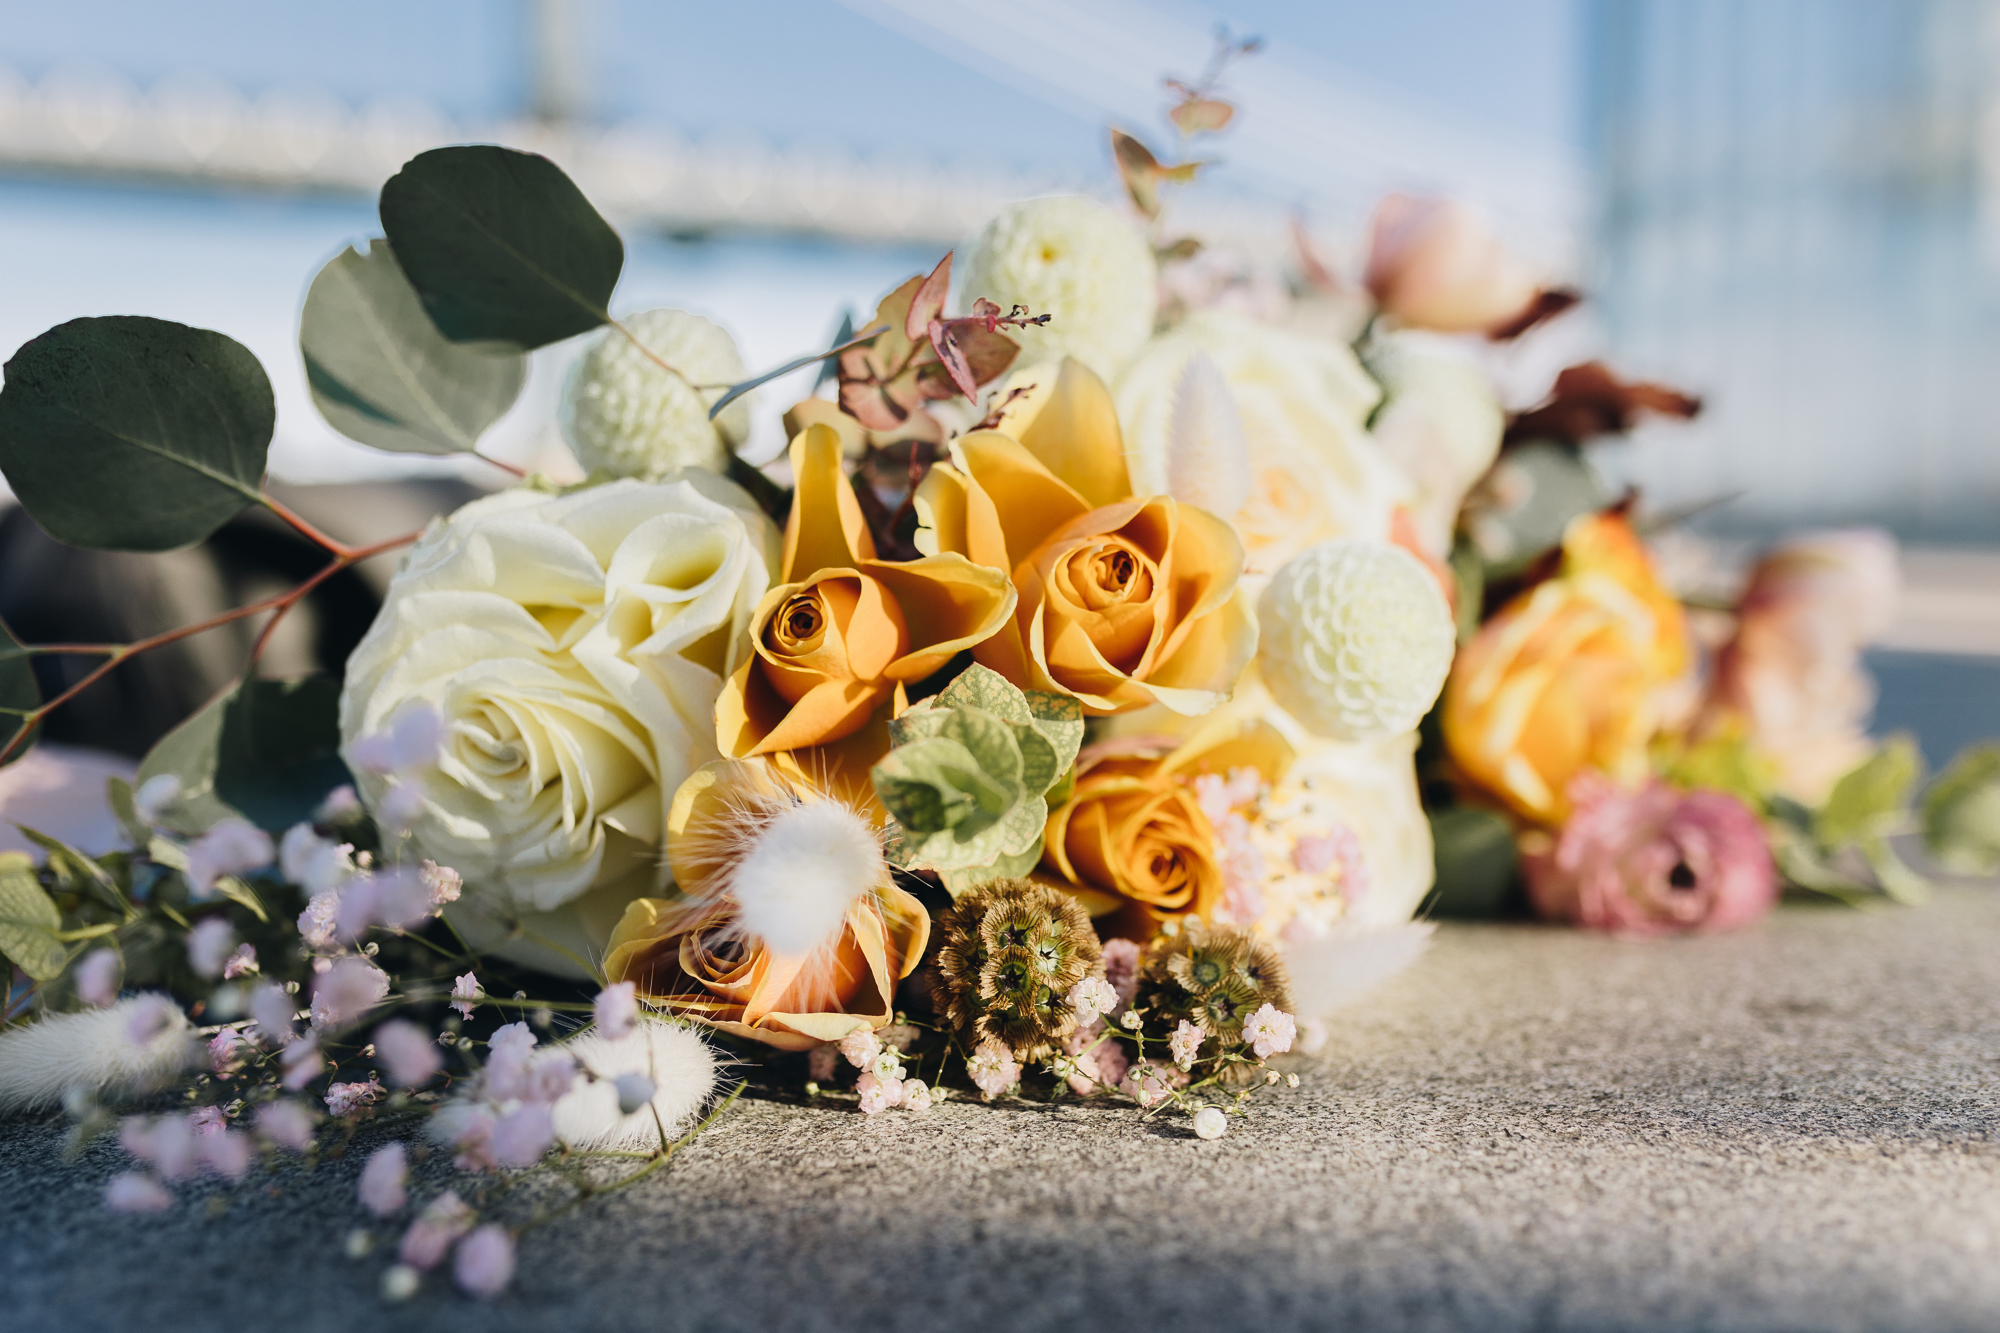 Loving Fall DUMBO Elopement with New York views and foliage